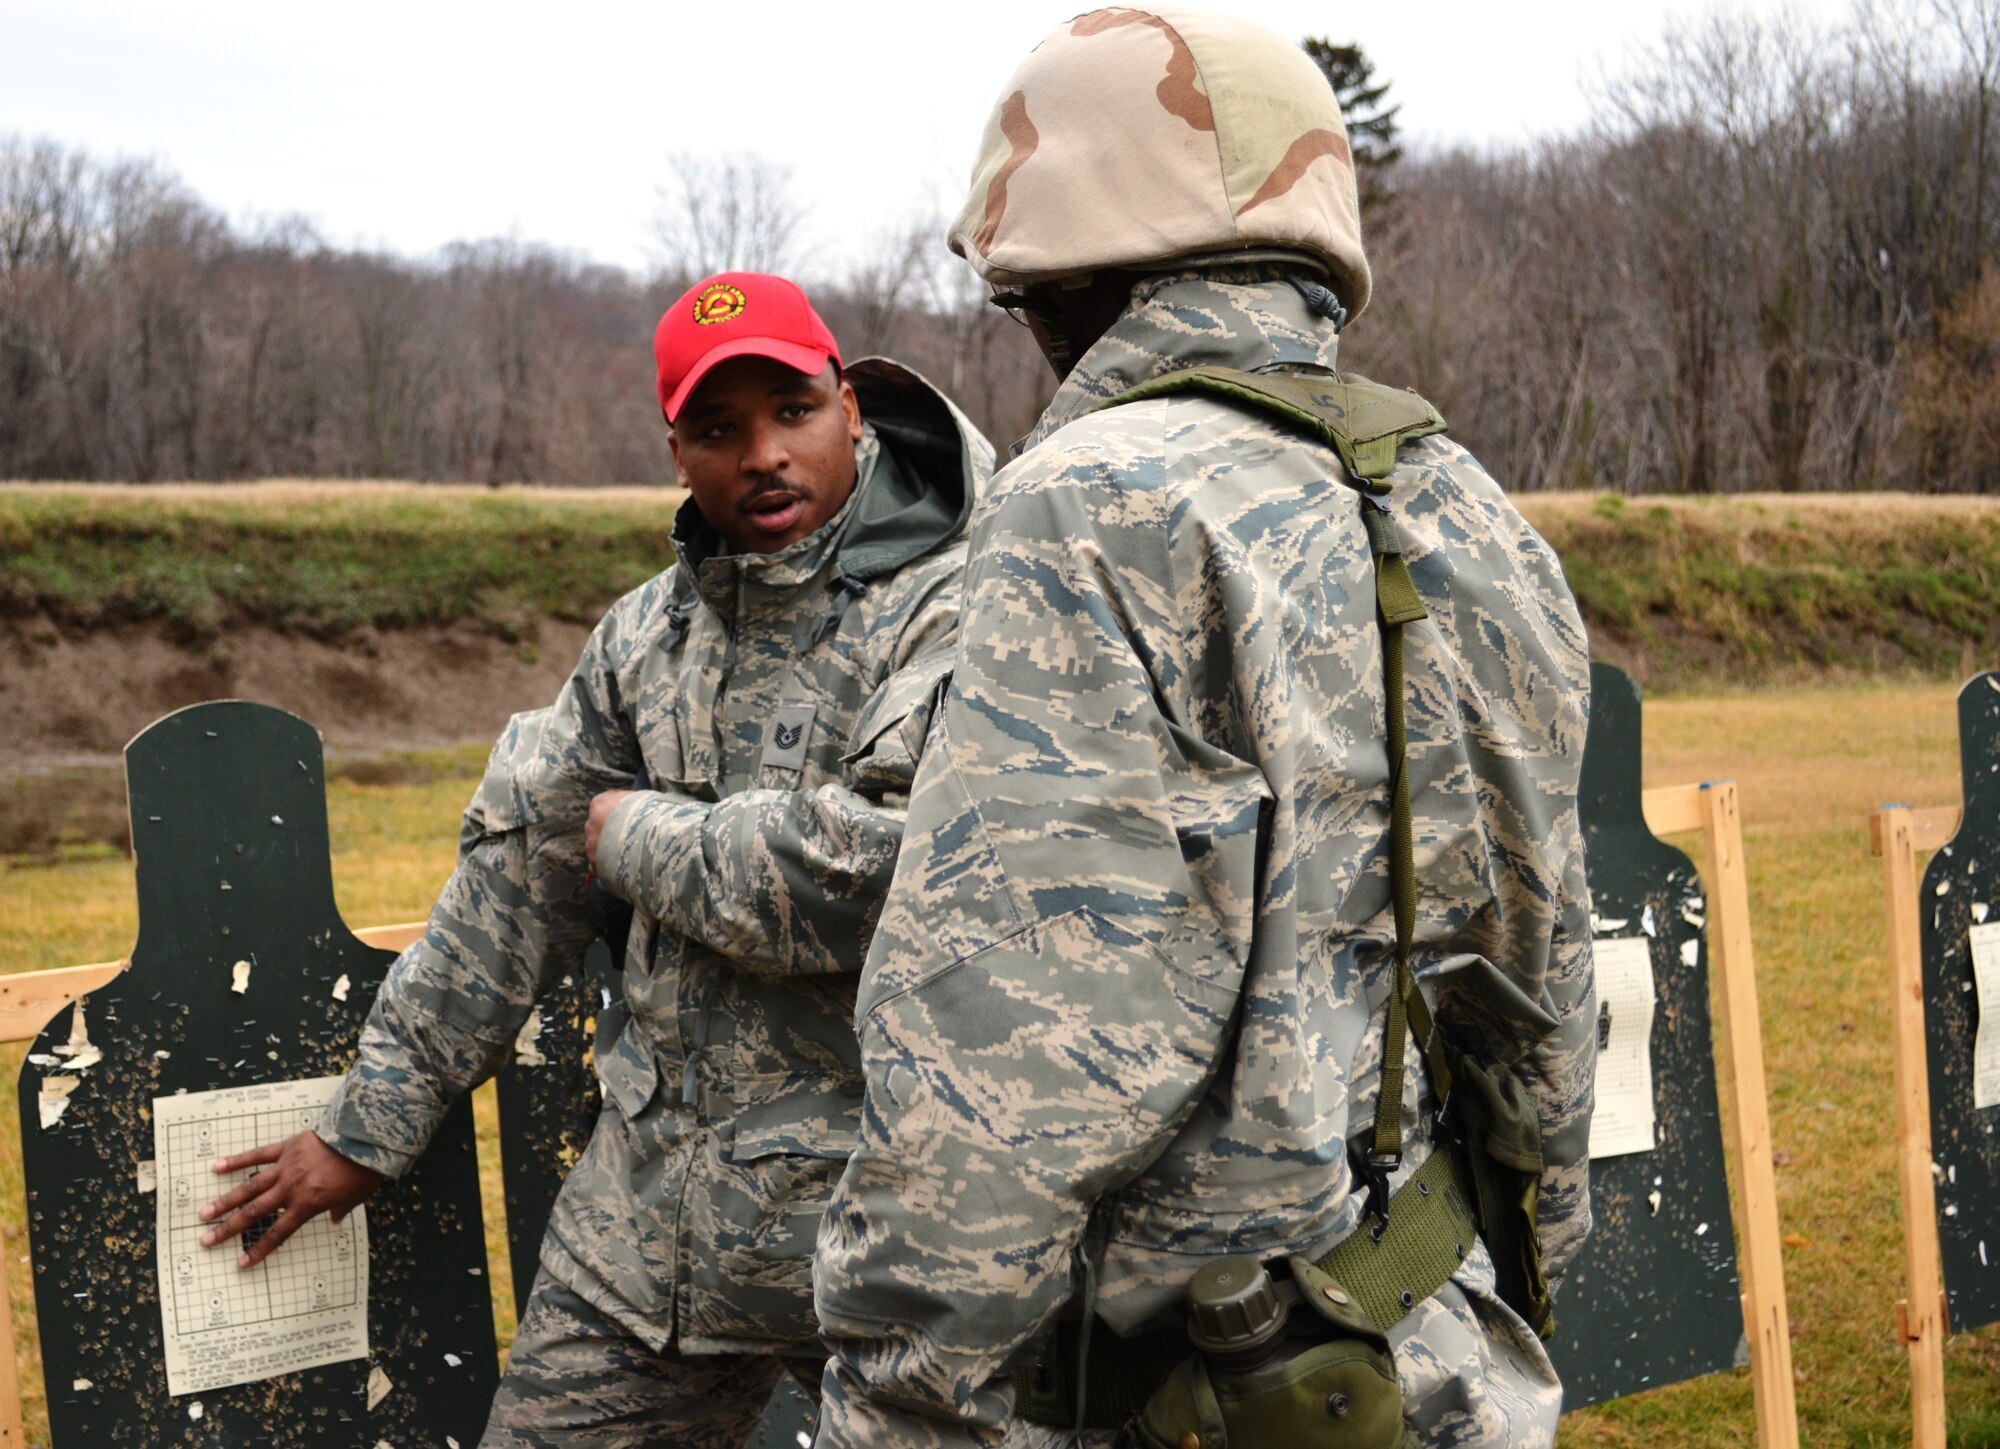 Tech. Sgt. Jerome Howard, left, a combat arms instructor, discusses the grouping pattern of Airman First Class Daniel Generette ’s  shooting on the rifle range at Gunpowder Military Reservation. The Maryland Air National Guard is in the process of changing the course of fire for small arms qualification which is mandated by the Air Force. (National Guard photo by Senior Airman Rebecca Salazar)